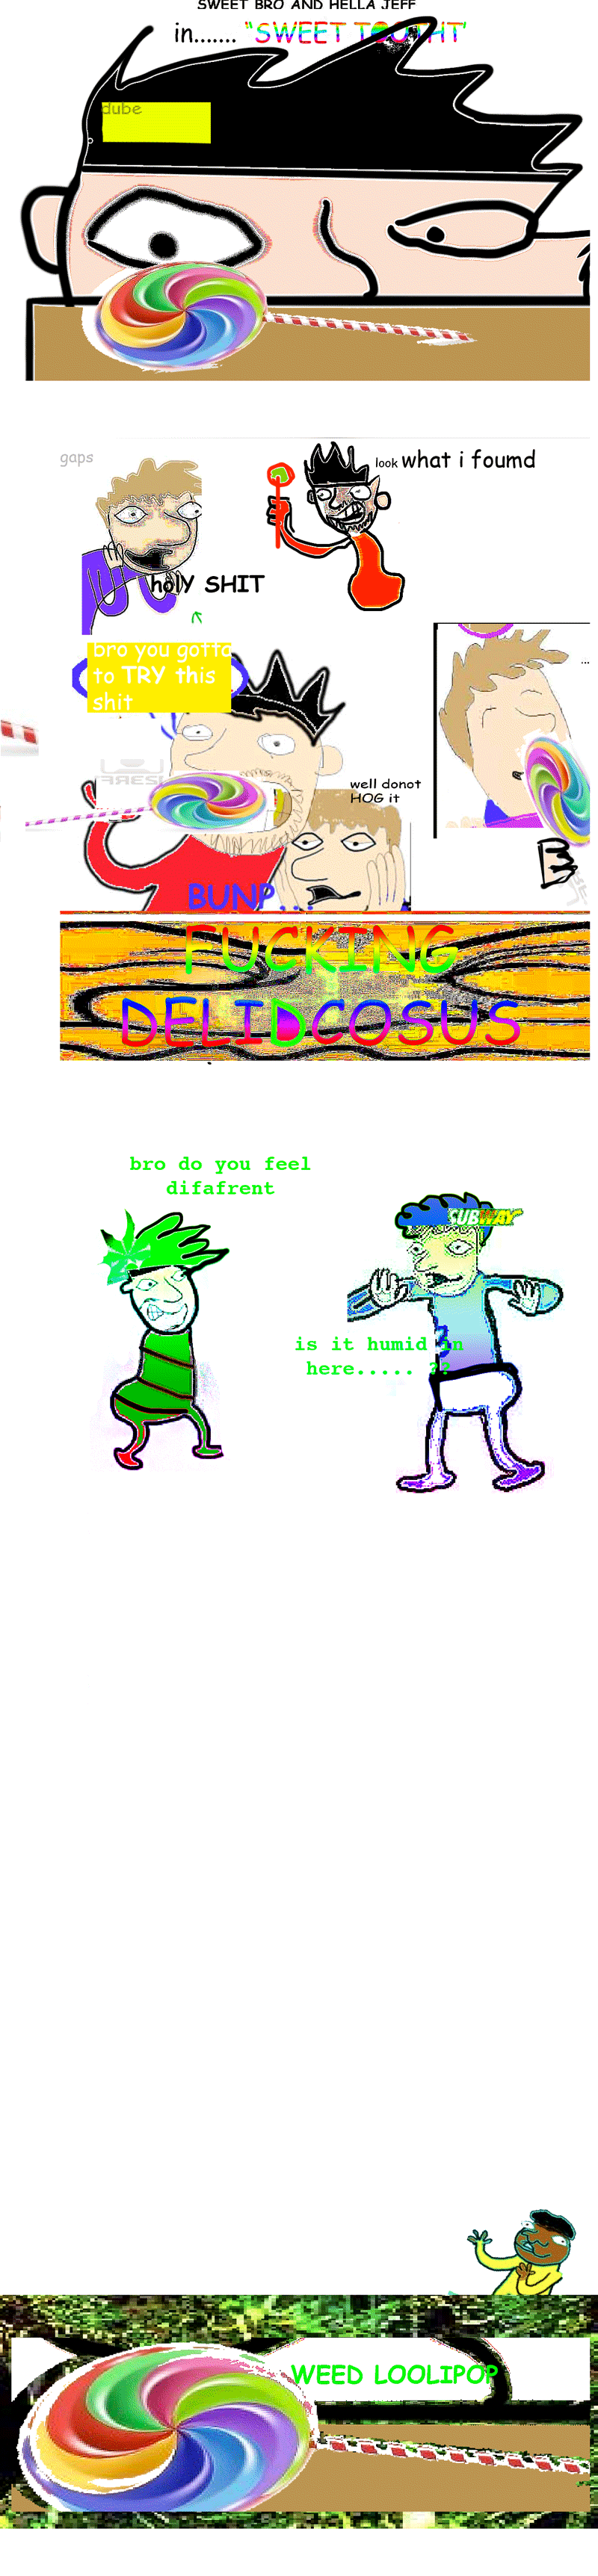 animated comic deleted_source geromy hella_jeff image_manipulation moved_source ripcord spiral_sucker sweet_bro sweet_bro_and_hella_jeff trickster_mode